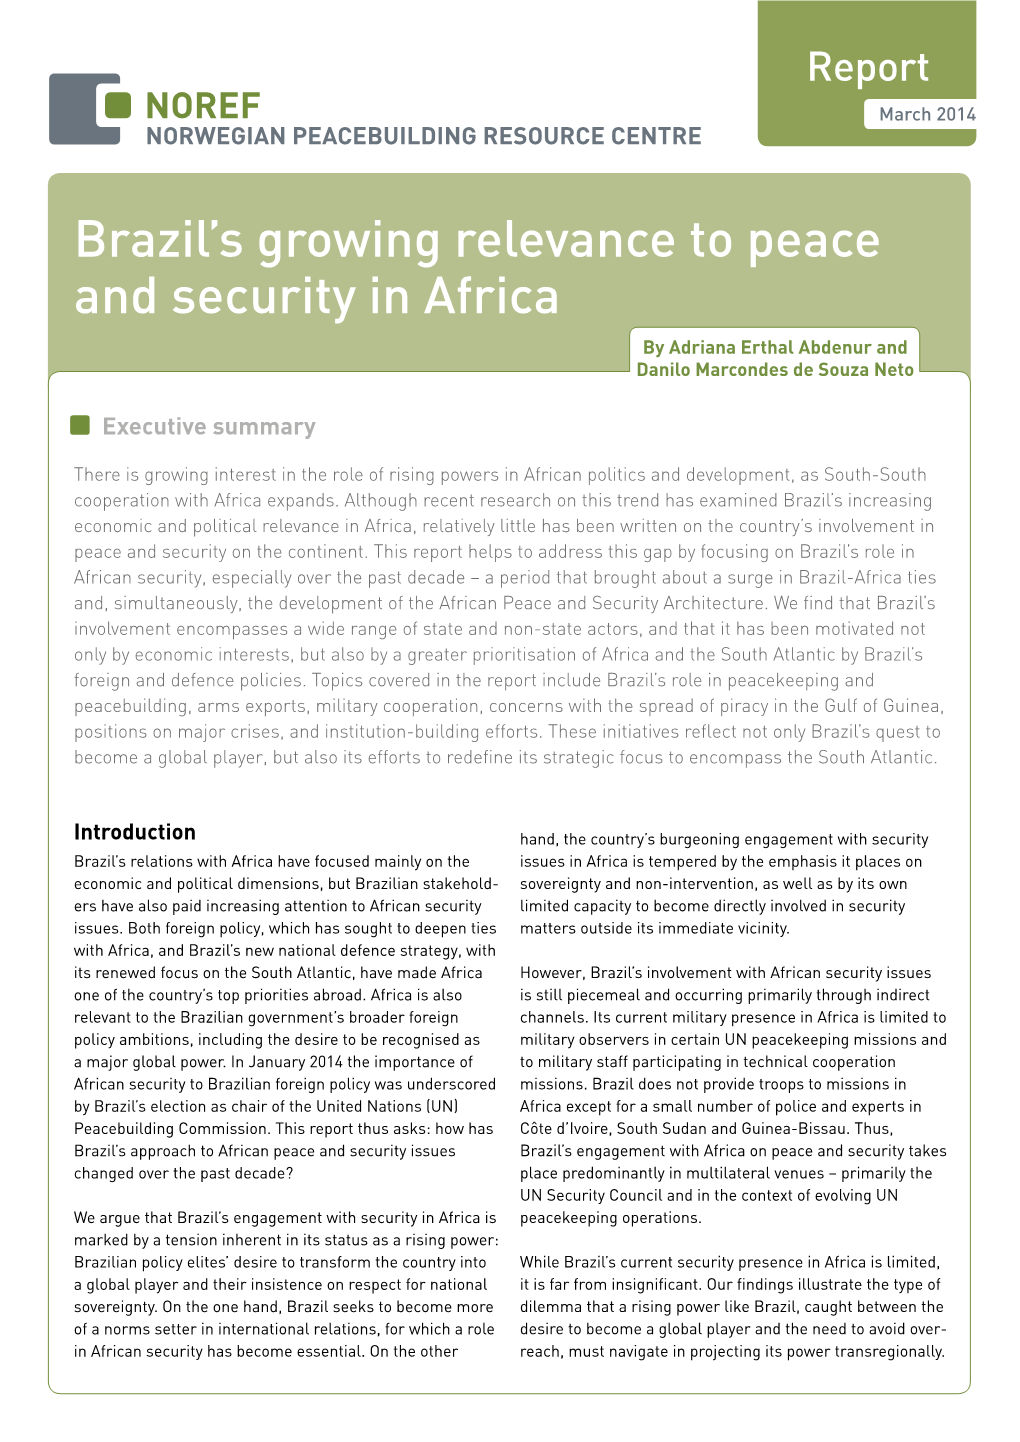 Brazil's Growing Relevance to Peace and Security in Africa